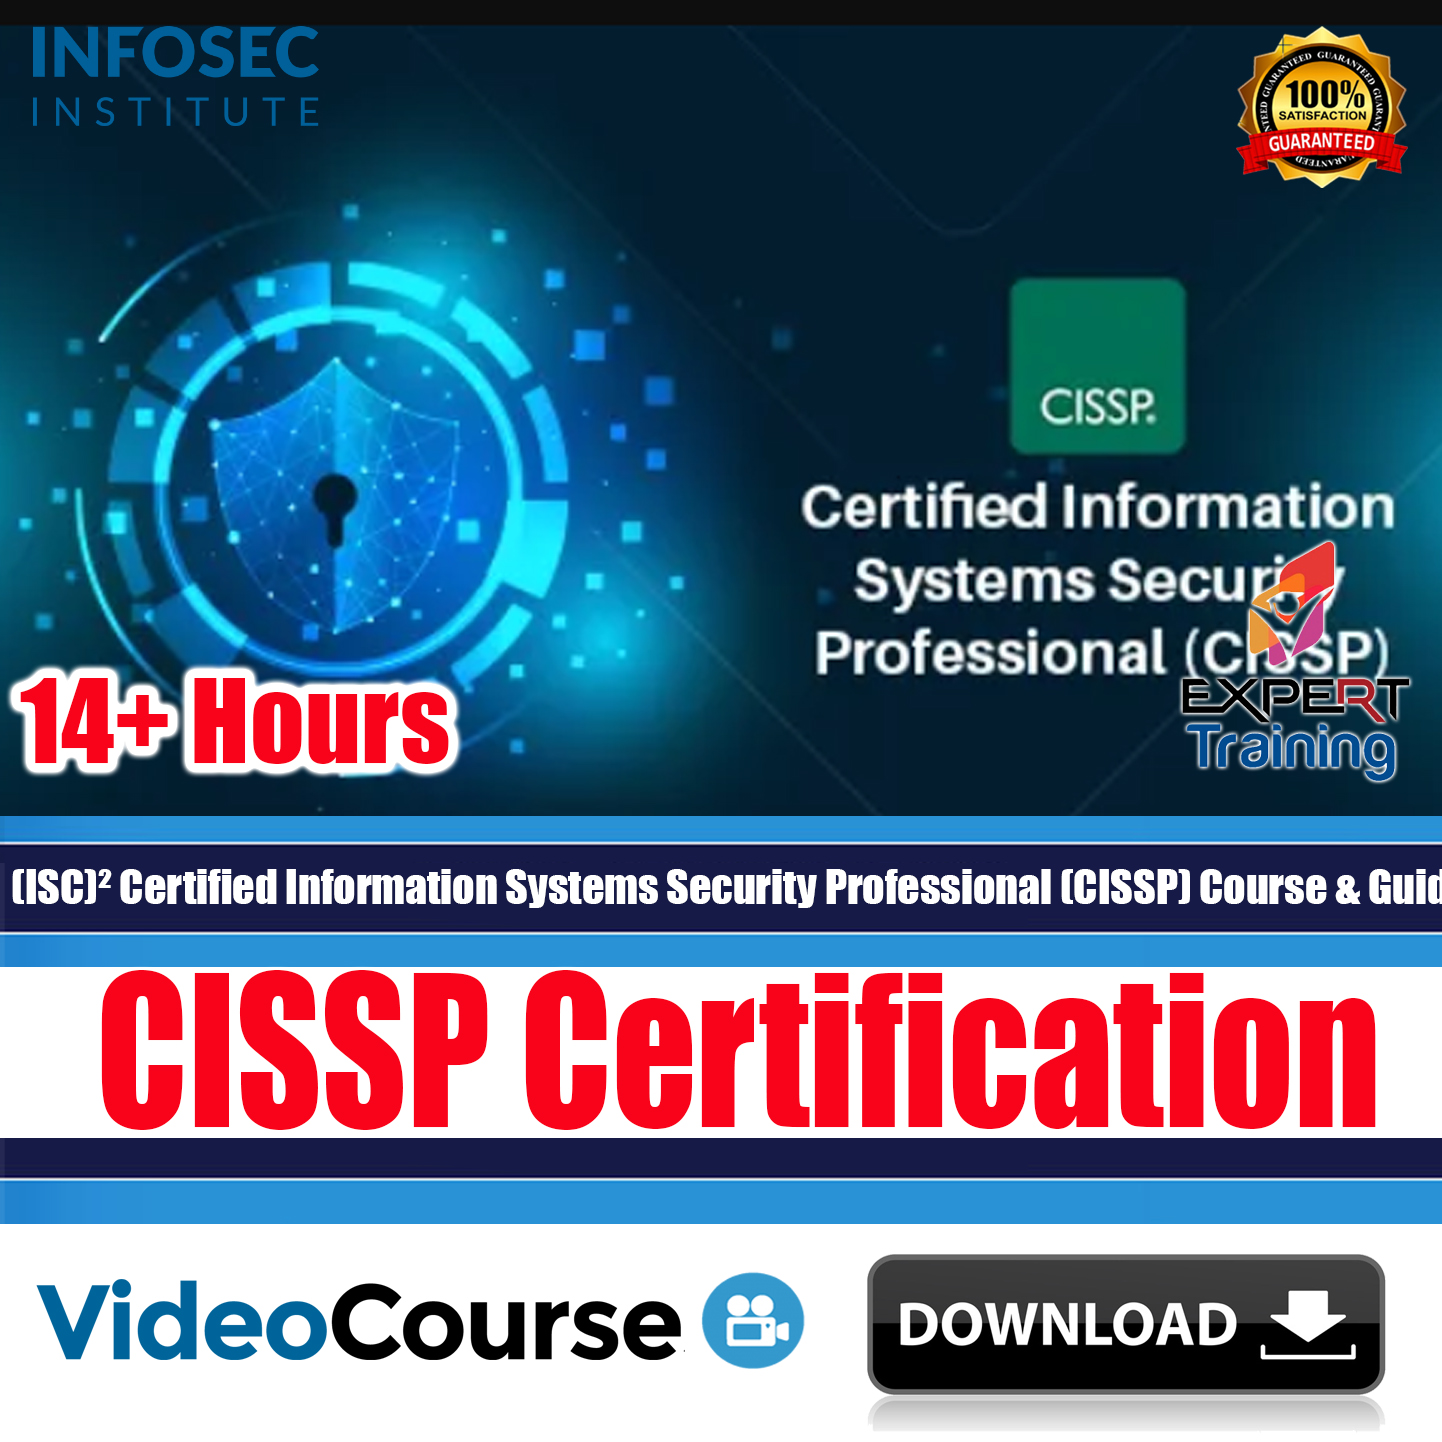 (ISC)² Certified Information Systems Security Professional (CISSP) Course & Guides